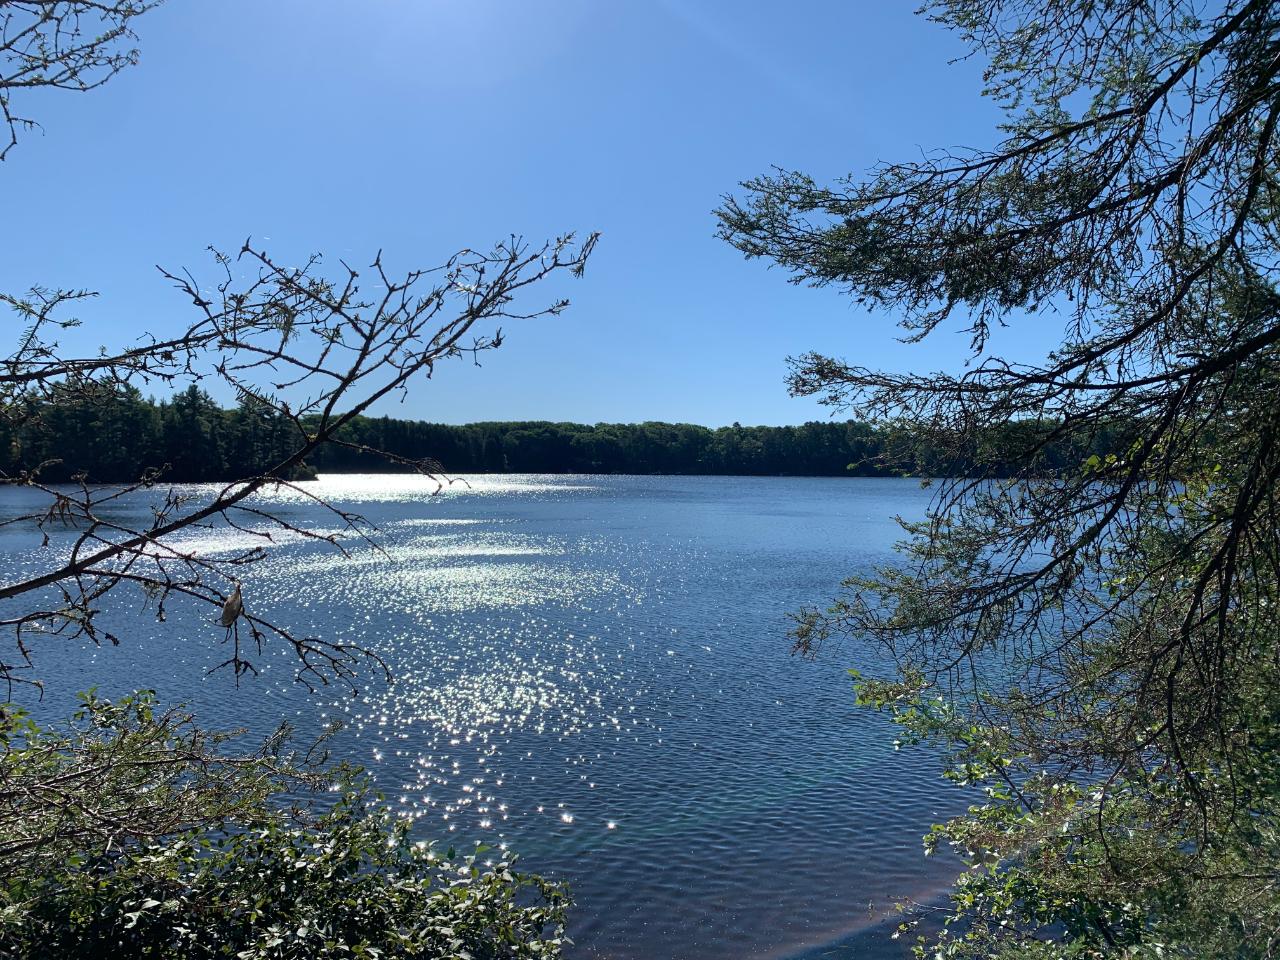 Exceptional building lots now available on Landing Lake in Vilas County. The pristine Landing Lake flows into Mill Lake offering you 328 acres of endless recreation. These lots offer ultimate privacy, towering trees and endless lake views. Sand frontage and crystal clear water.